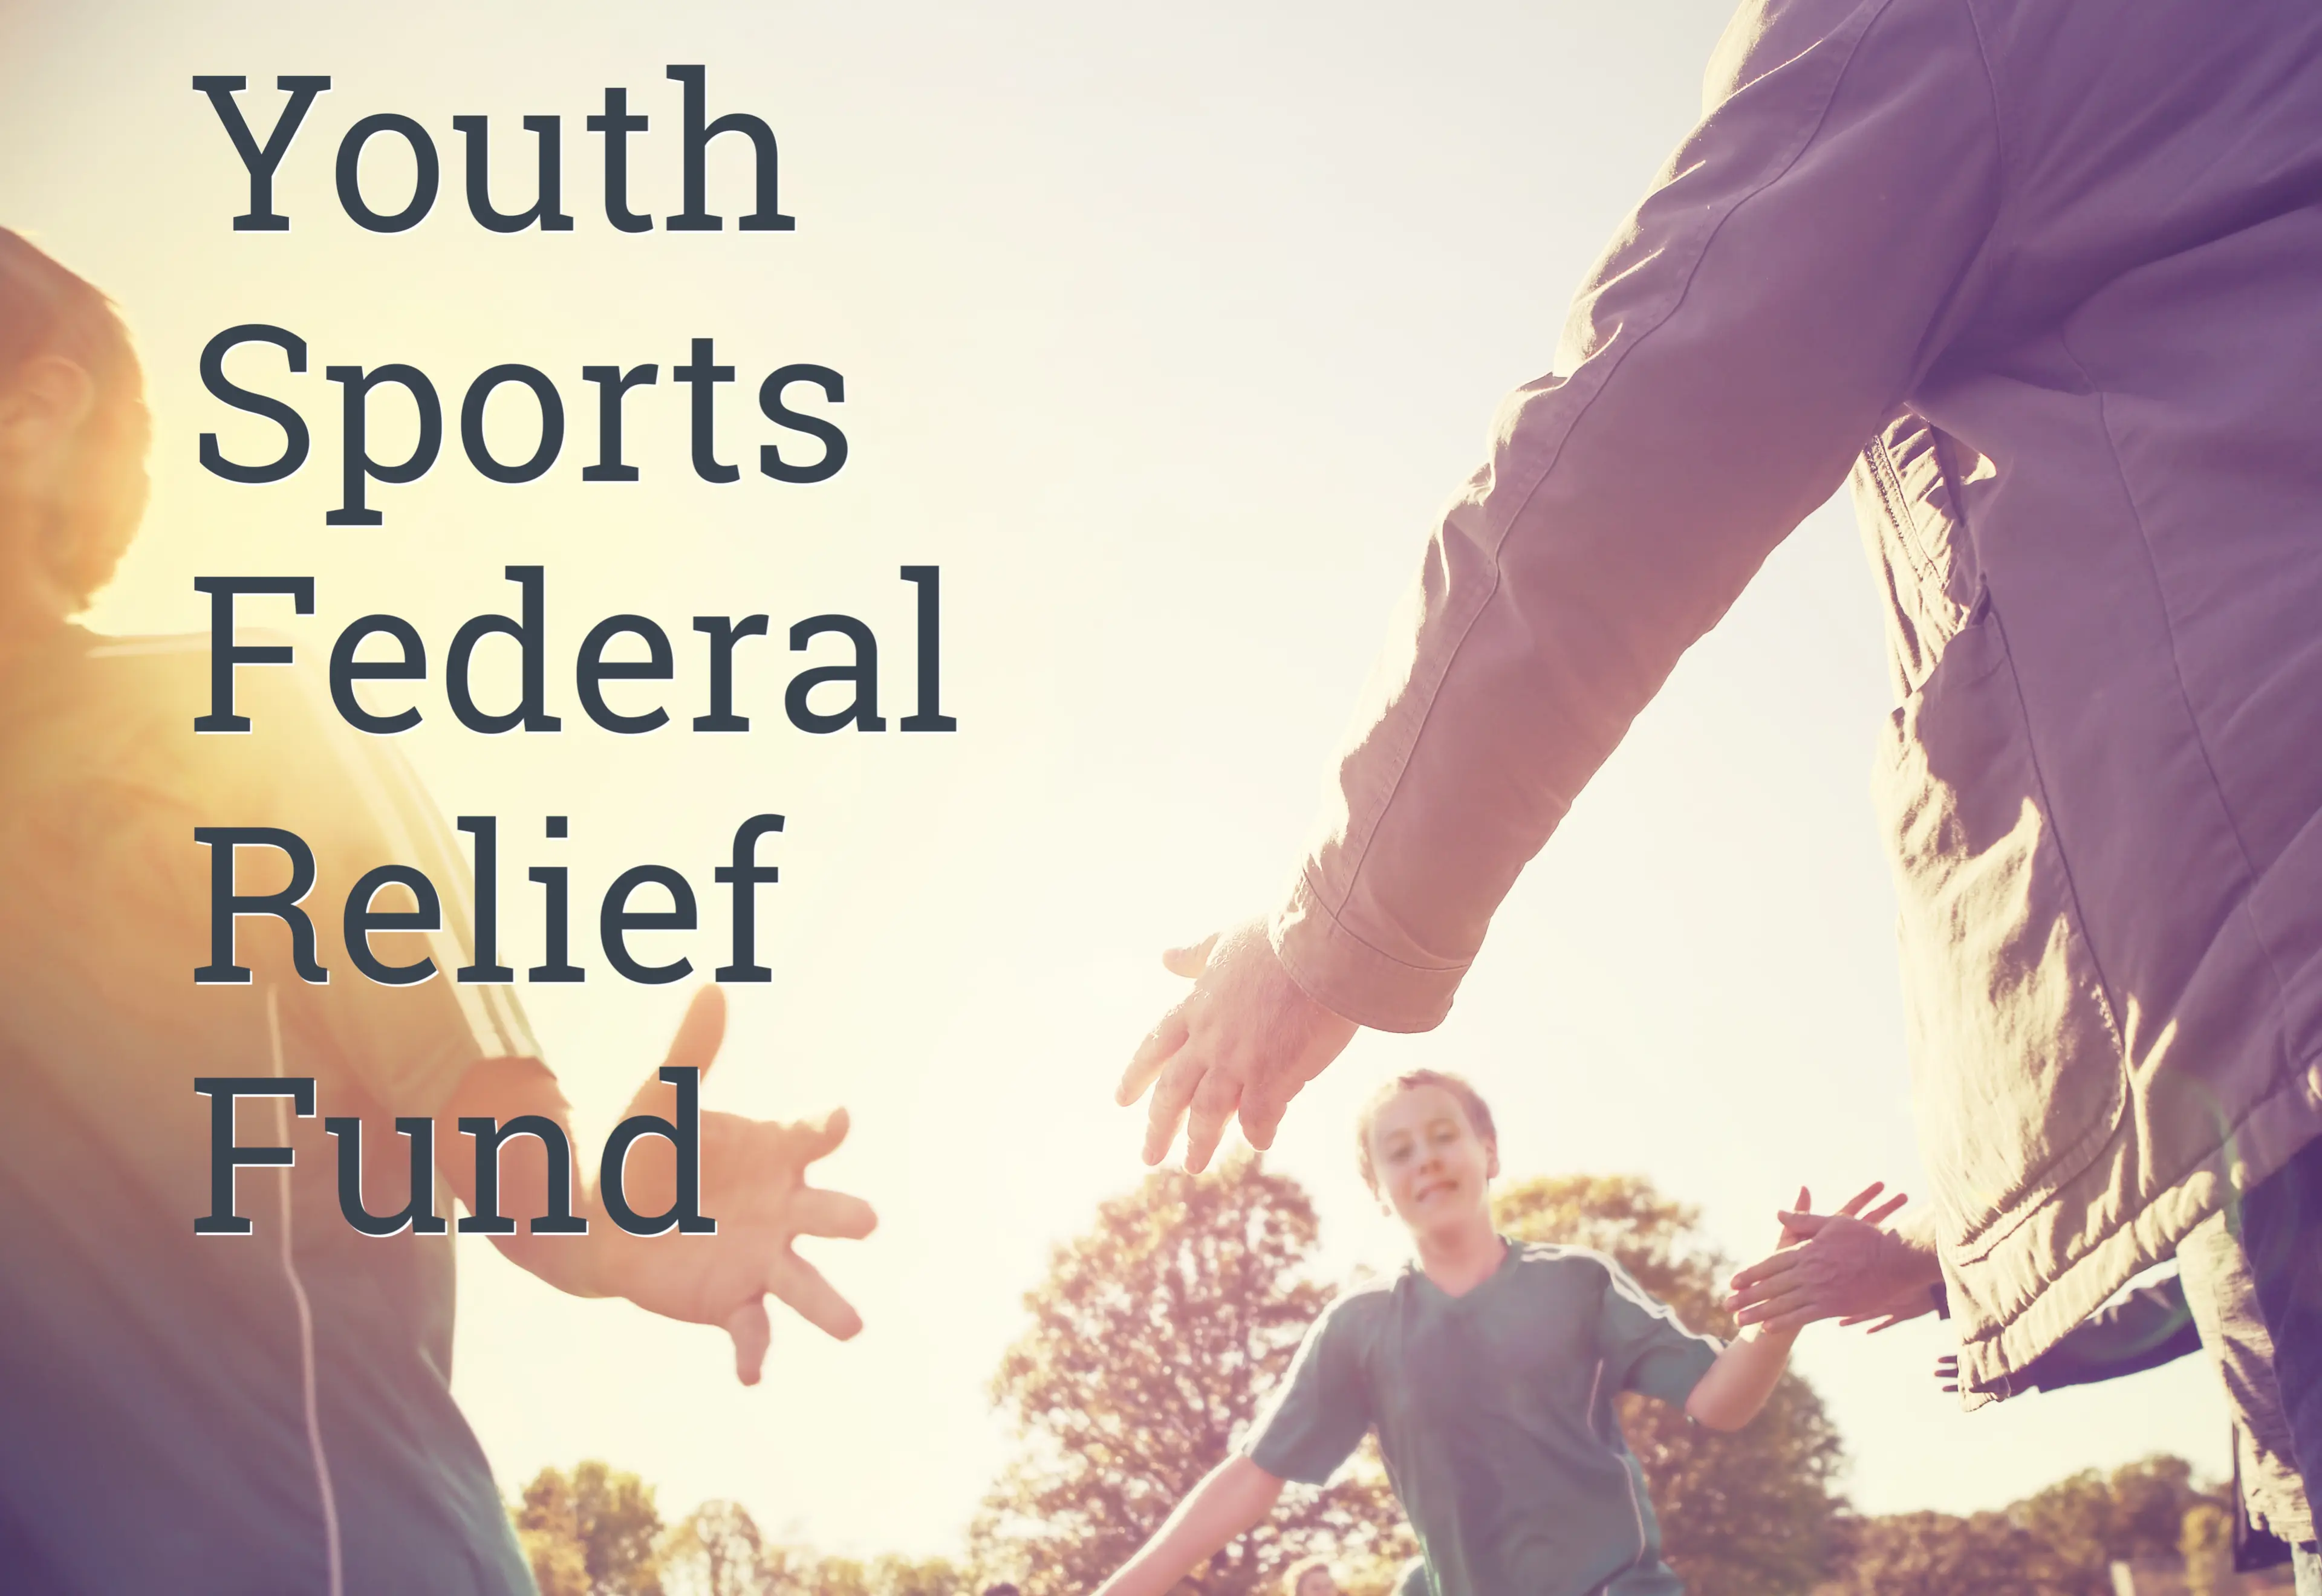 Featured image: You Can Help Save Youth Sports in 30 Seconds